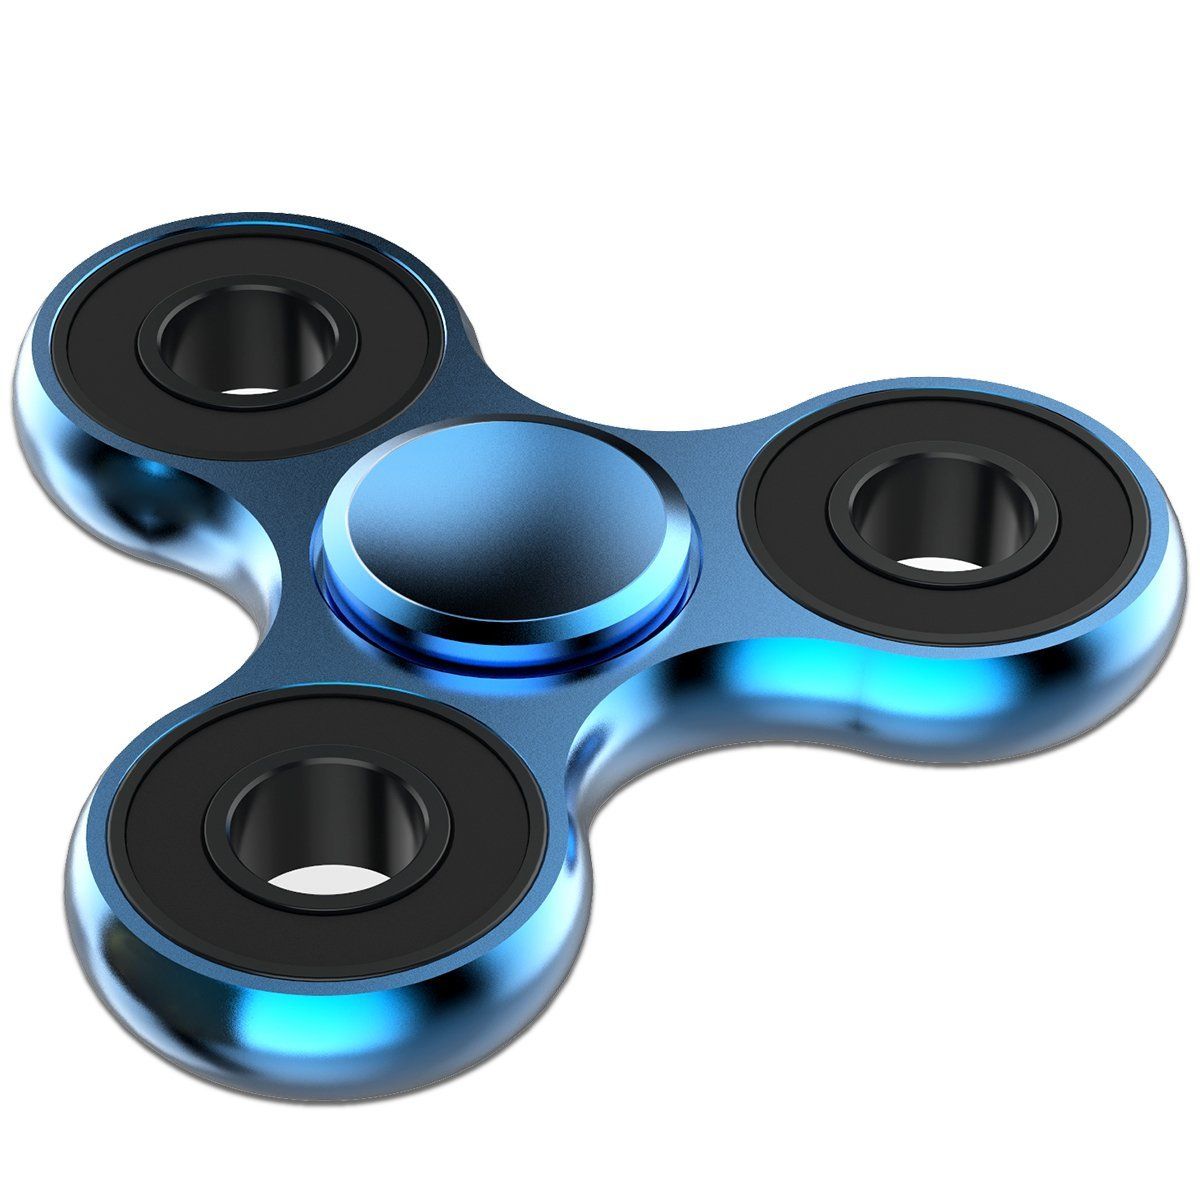 ATESSON Fidget Spinner Toy Ultra Durable Stainless Steel Bearing High Speed 1-5 Min Spins Precision Metal Material Hand spinner EDC ADHD Focus Anxiety Stress Relief Boredom Killing Time Toys